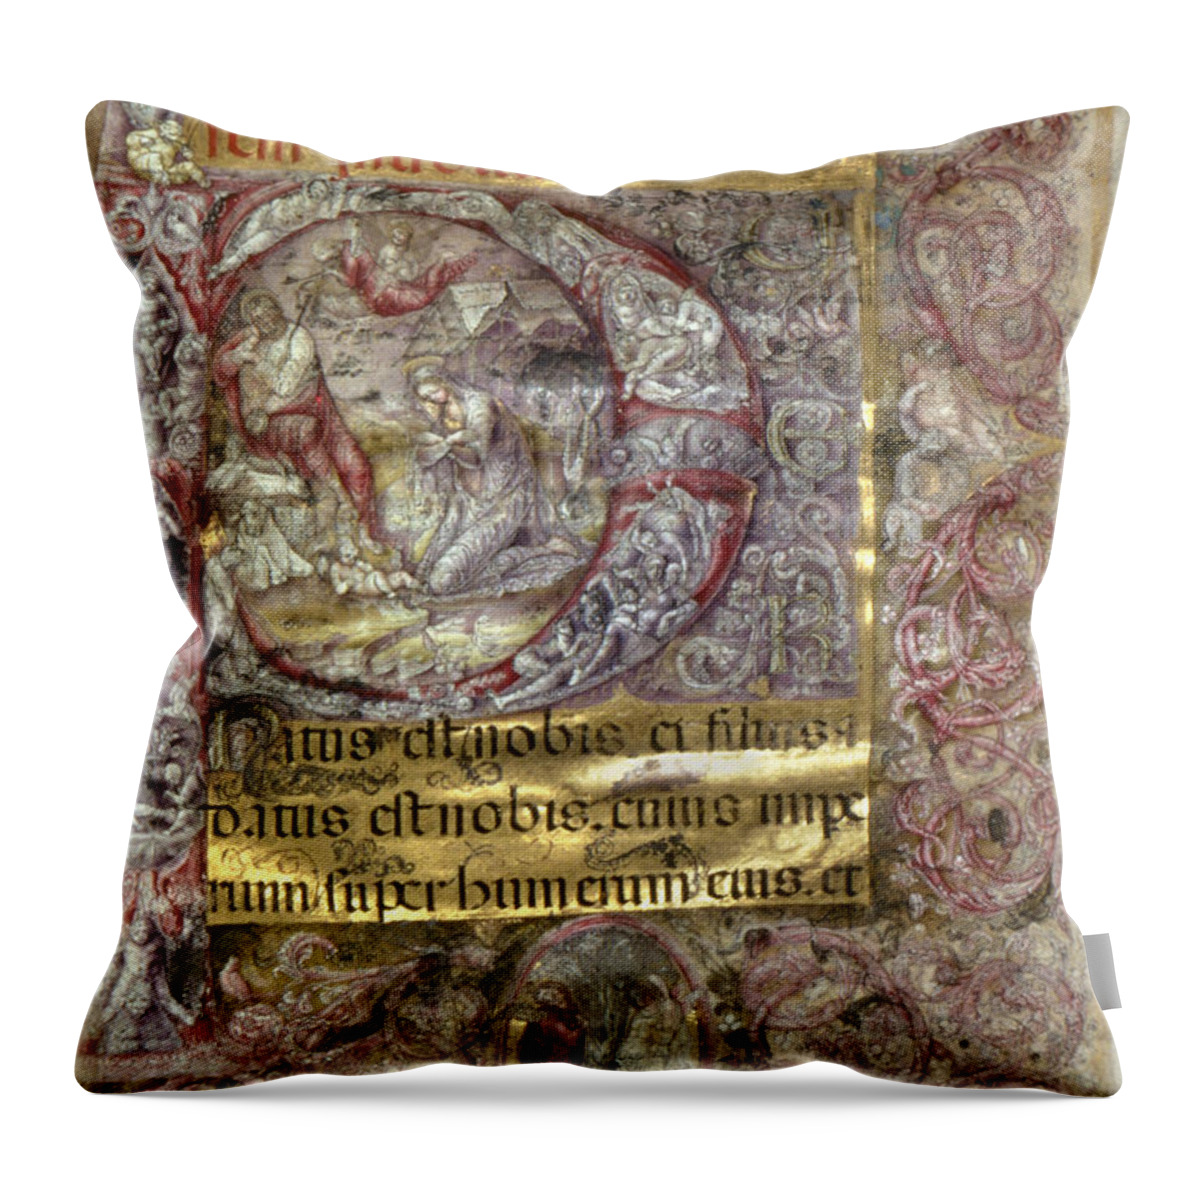 15th Century Throw Pillow featuring the photograph Nativity In An Initial P by Granger